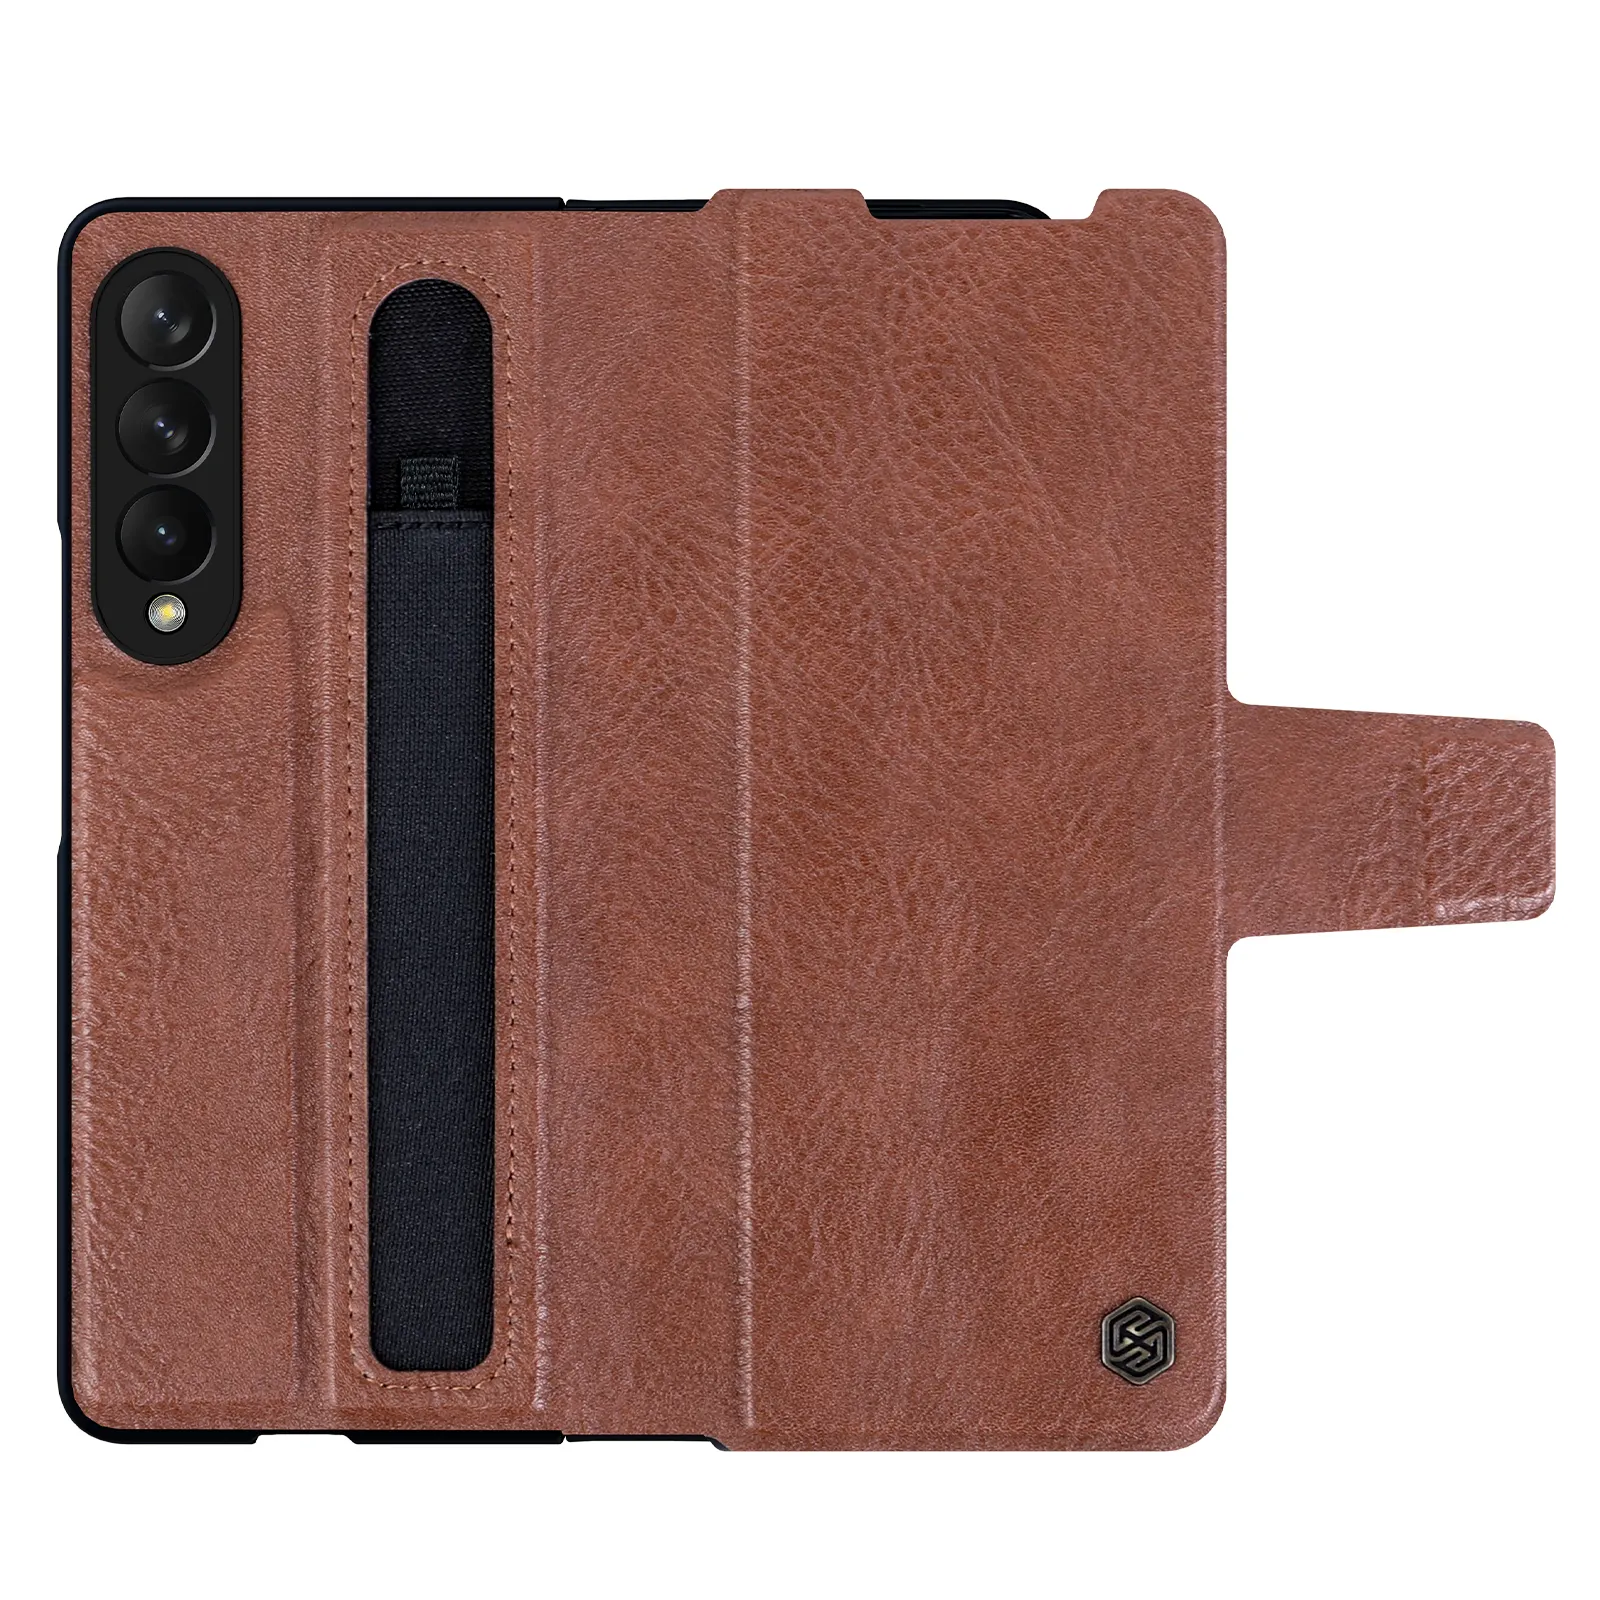 Nillkin Aoge Leather Case style Protective Back Cover Phone Stand Case For Samsung Galaxy Z Fold 3 5G Mobile Phone case